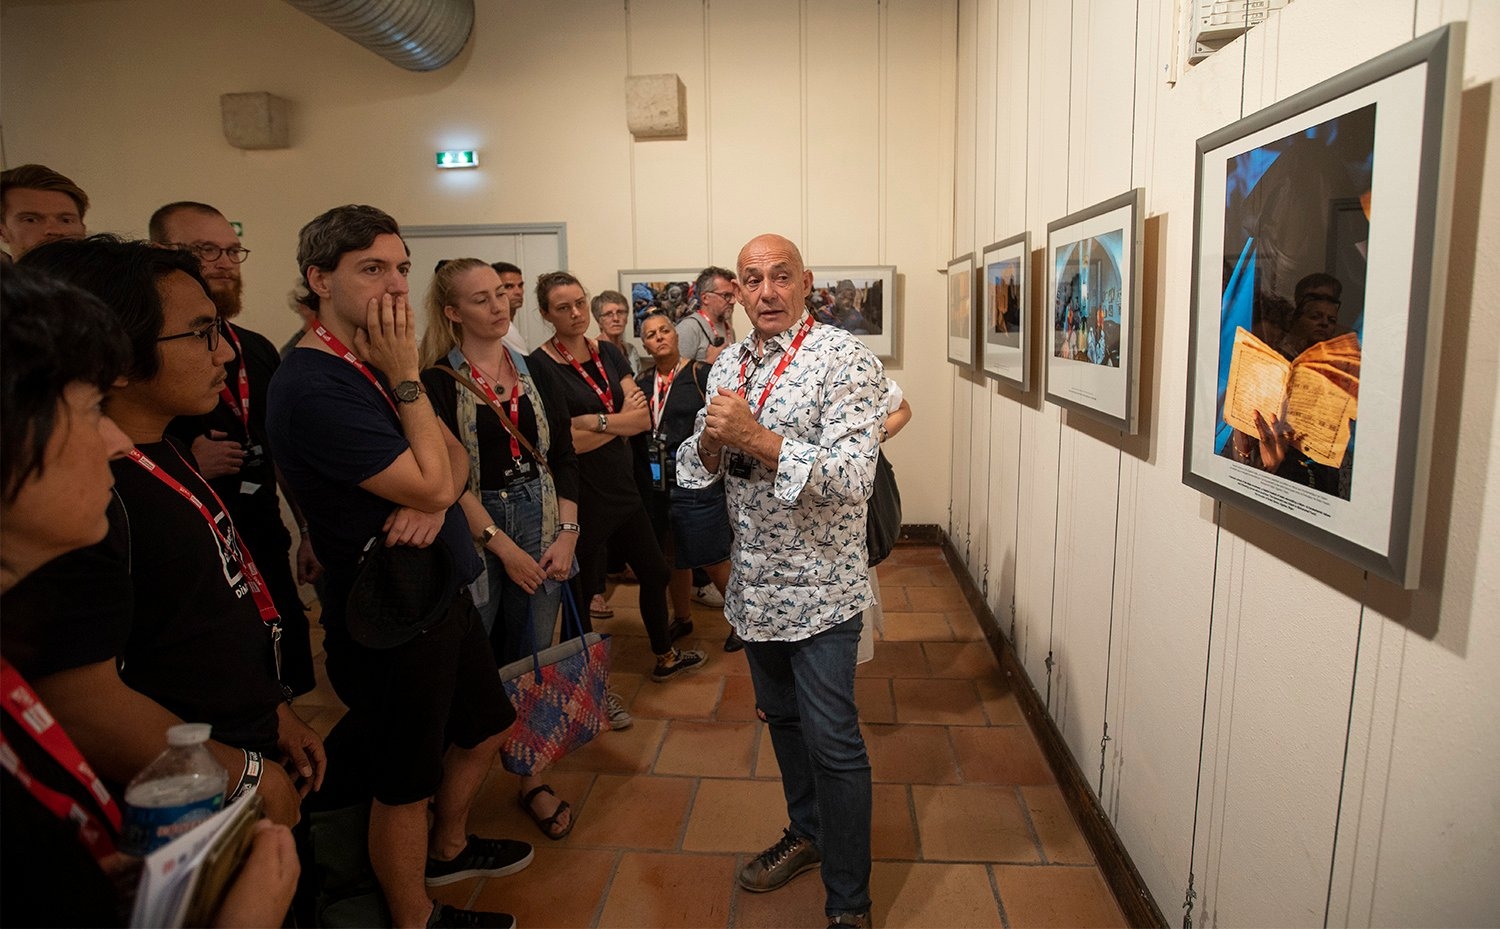 Pascal Maitre gives a tour of his exhibition, covering refugees crossing the Sahel desert. © Paul Hackett